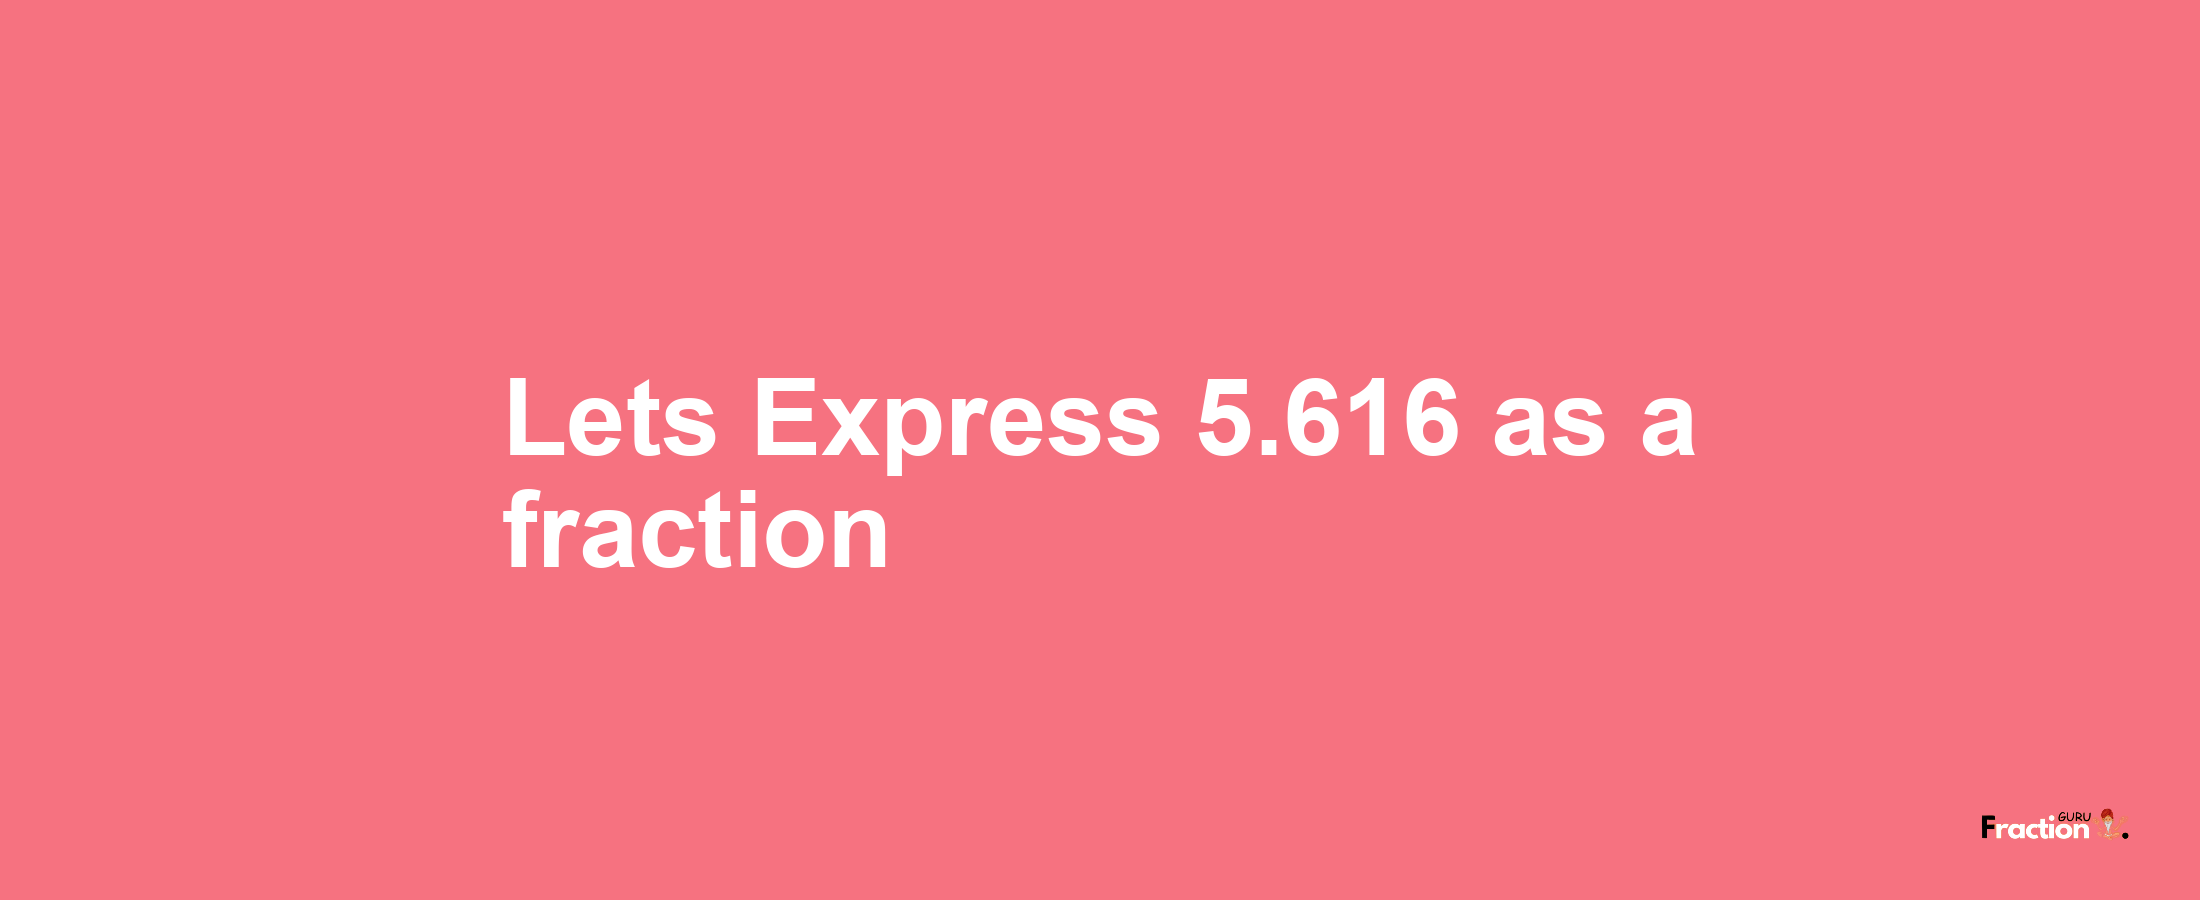 Lets Express 5.616 as afraction